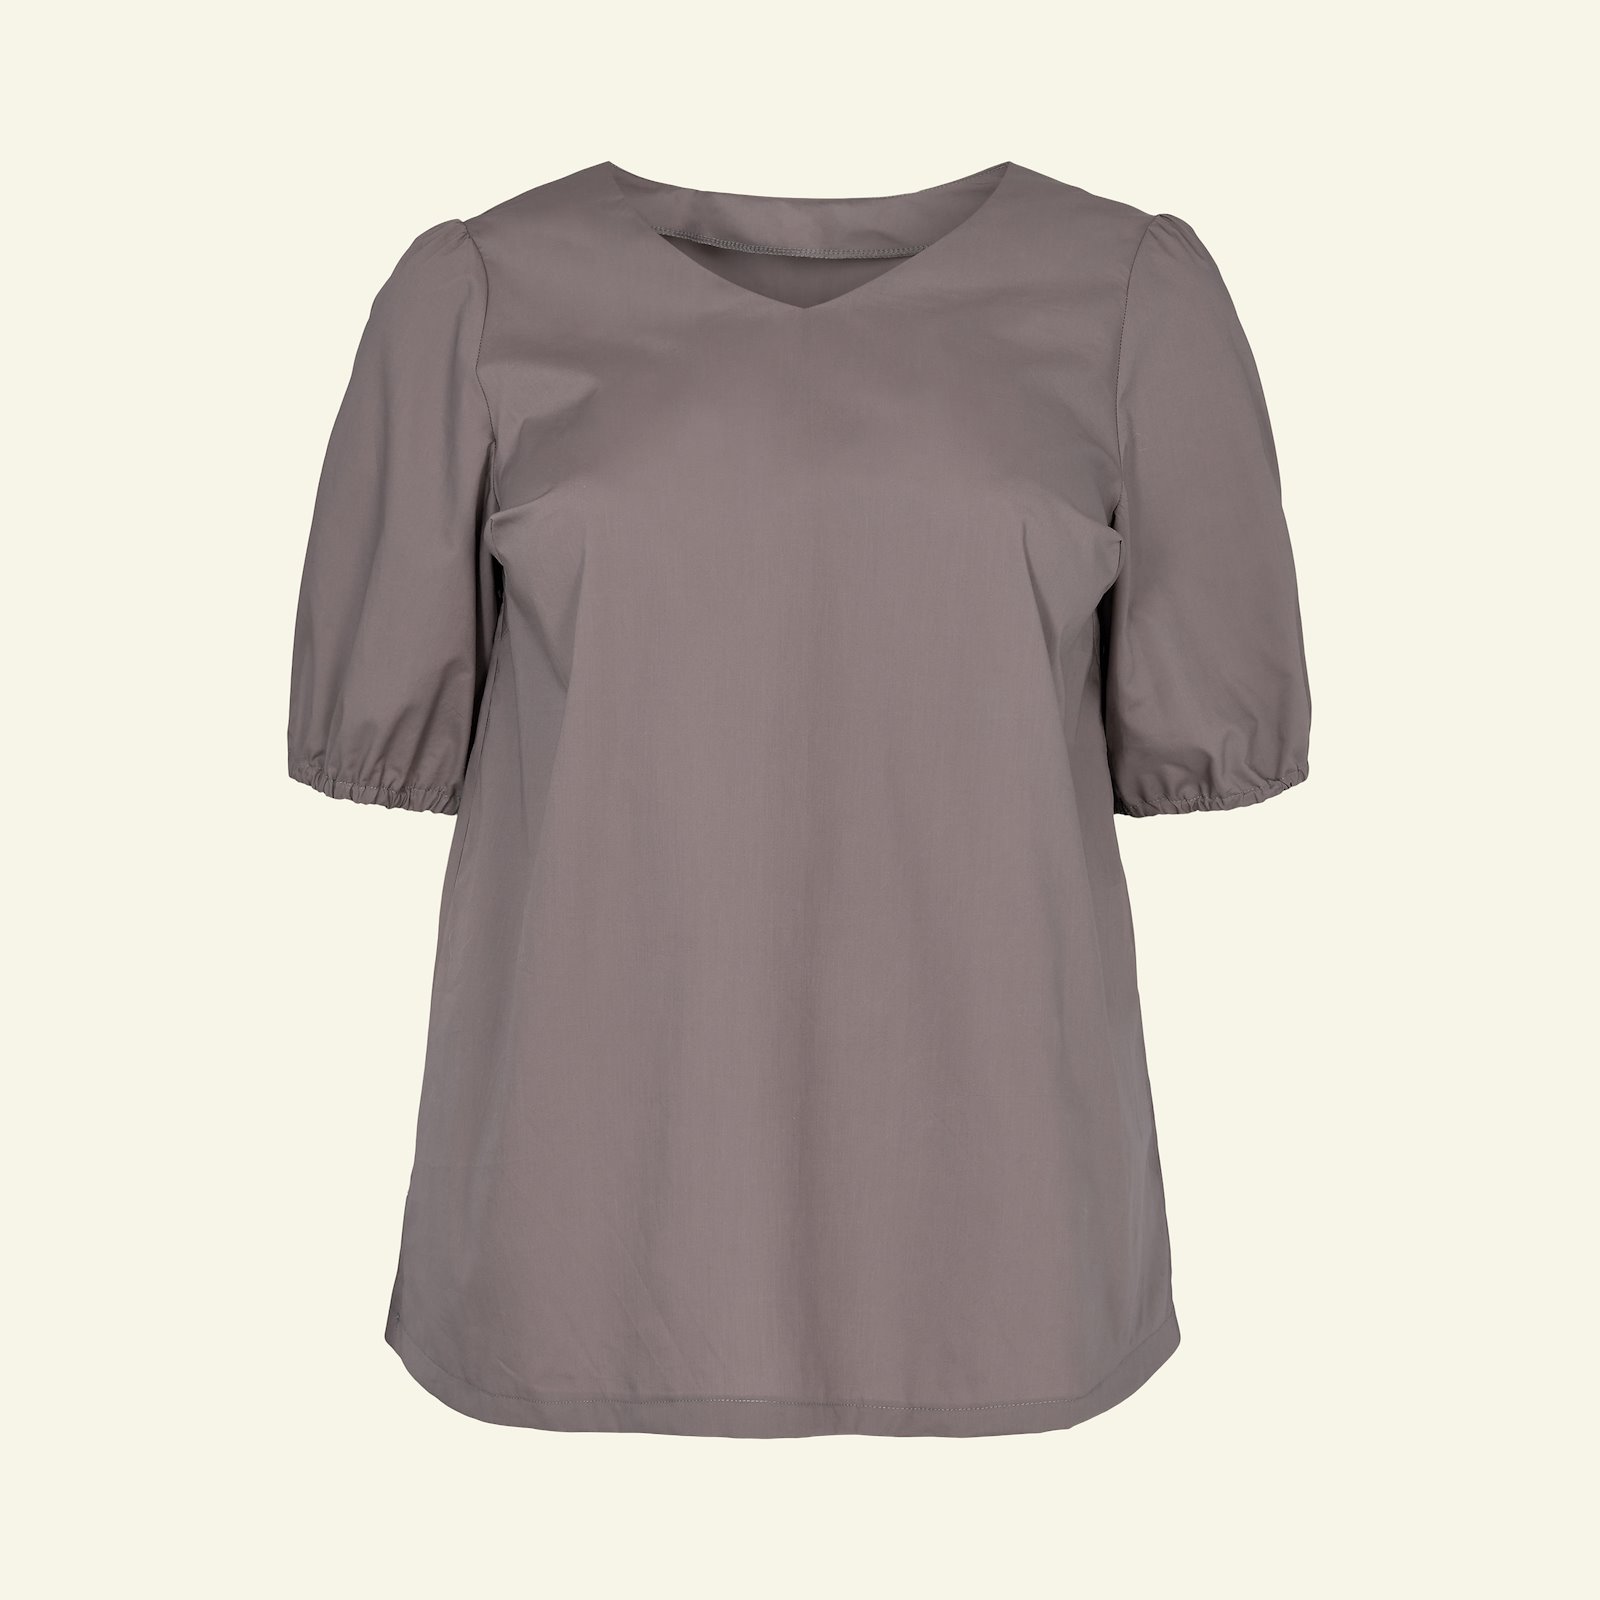 Blouse with long and short sleeve, 56/28 p72006_540121_sskit